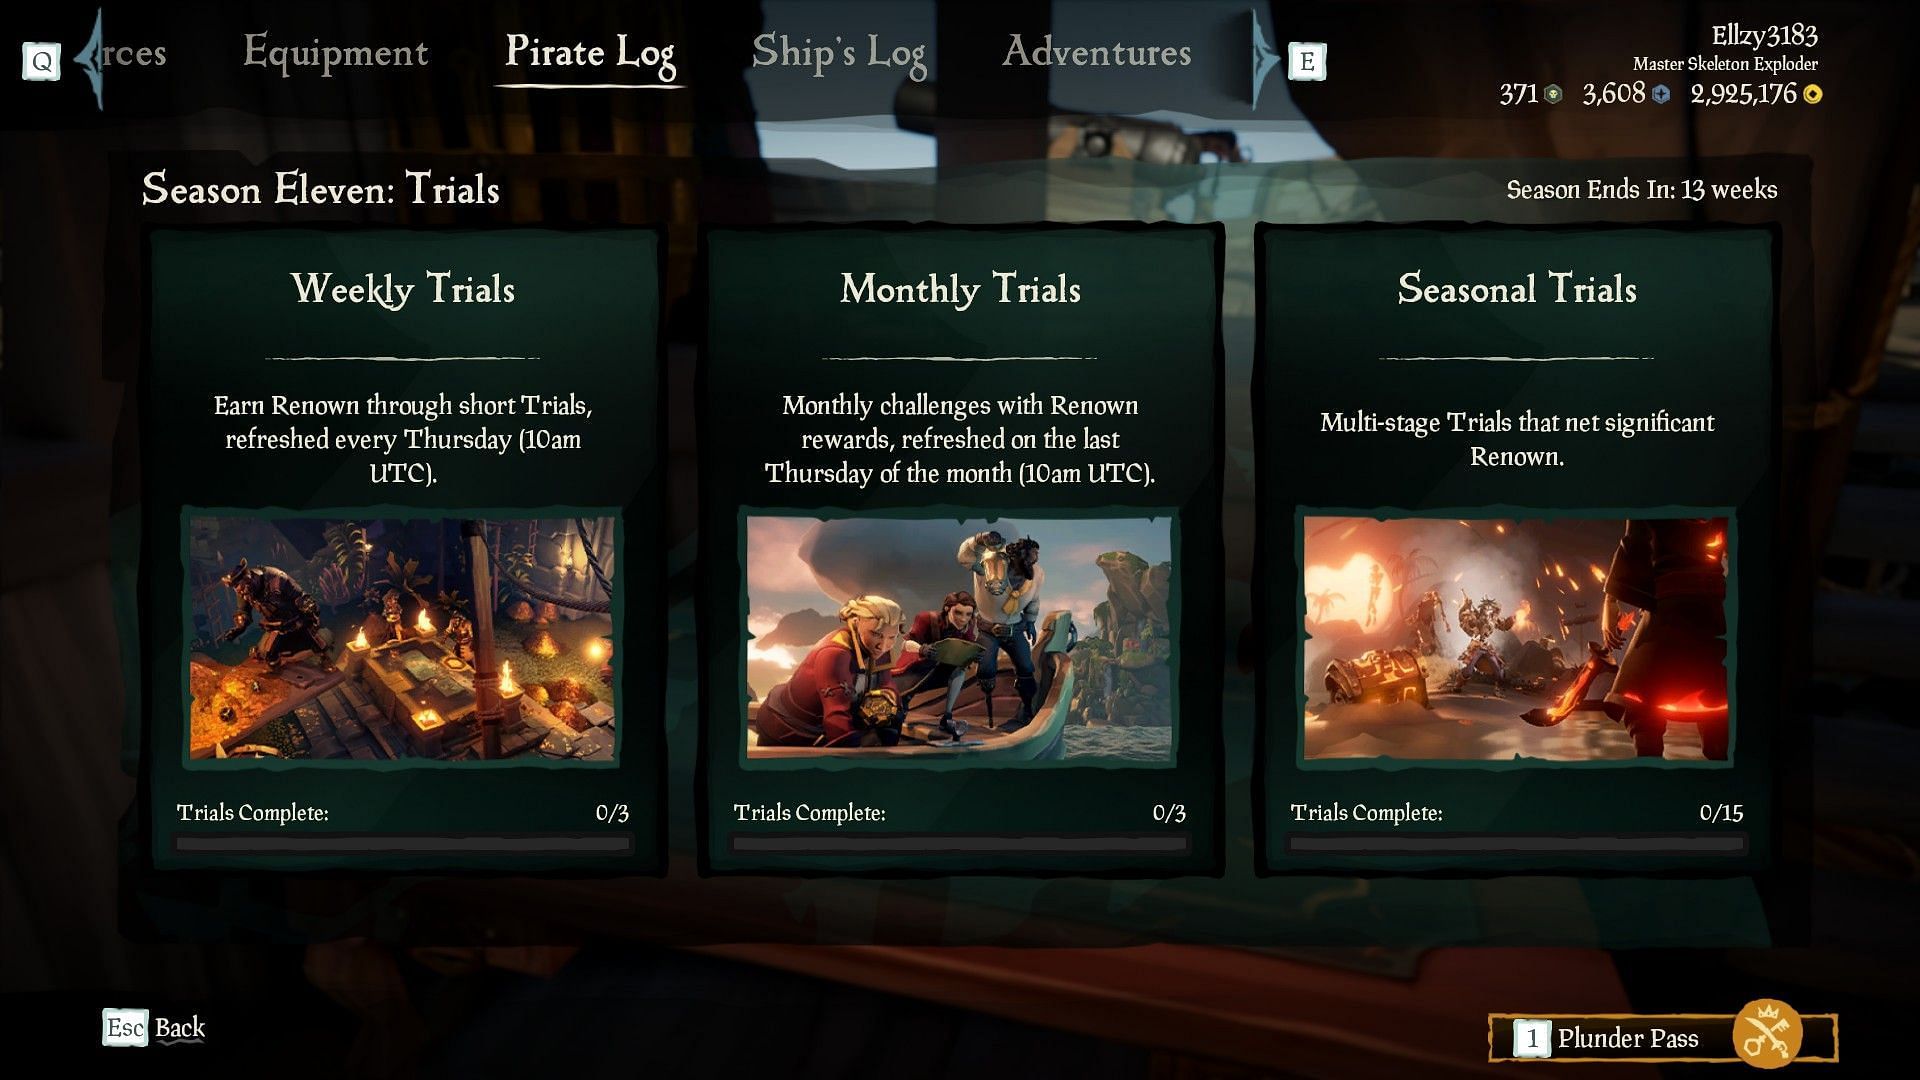 Daily and weekly trials can be accessed from the menu. (Image via Rare)